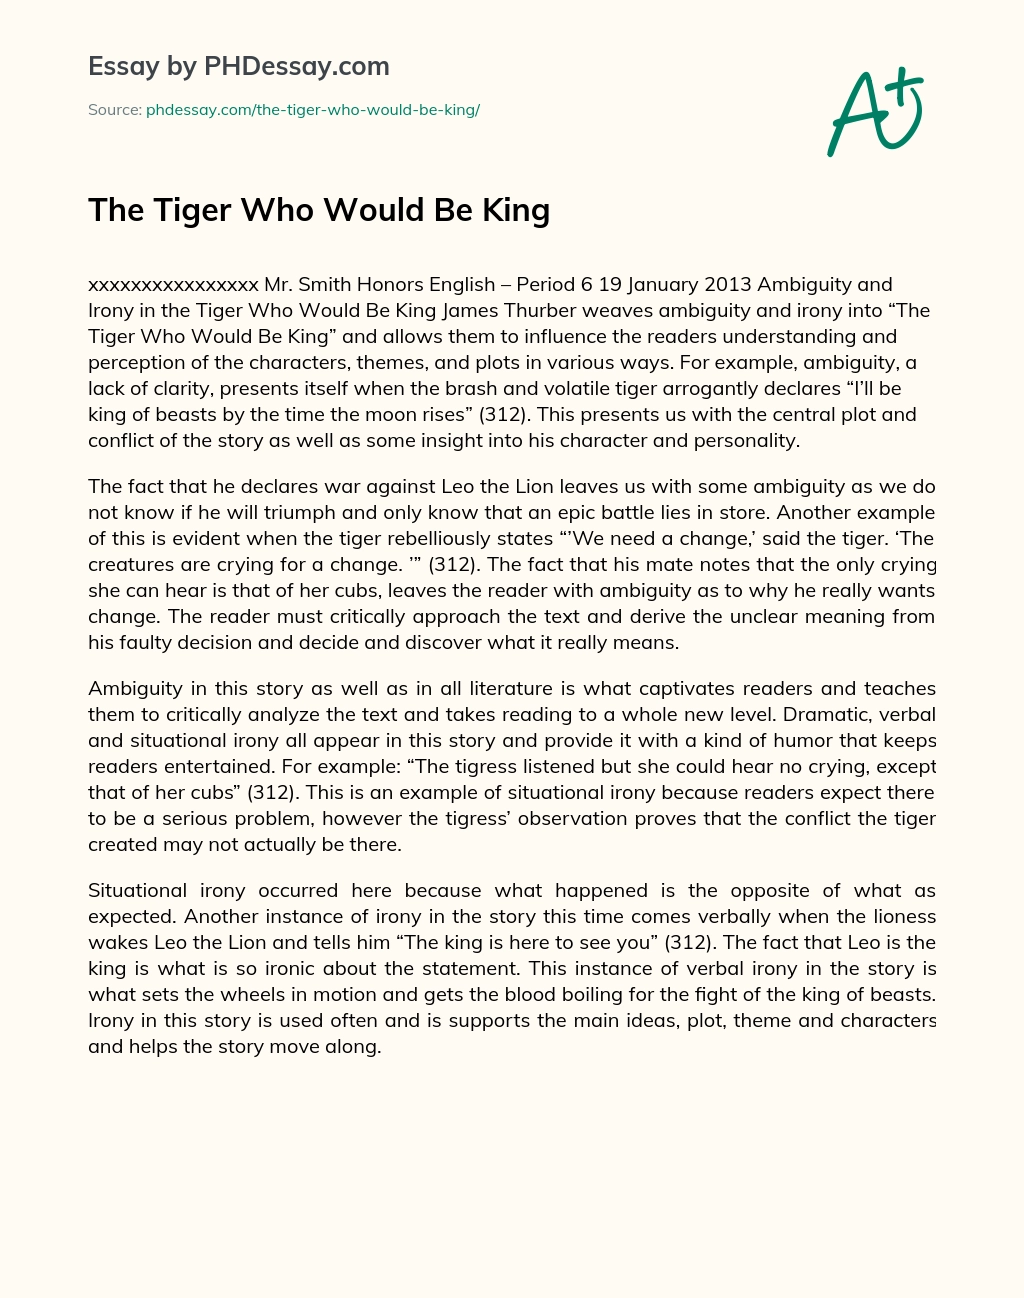 The Tiger Who Would Be King essay